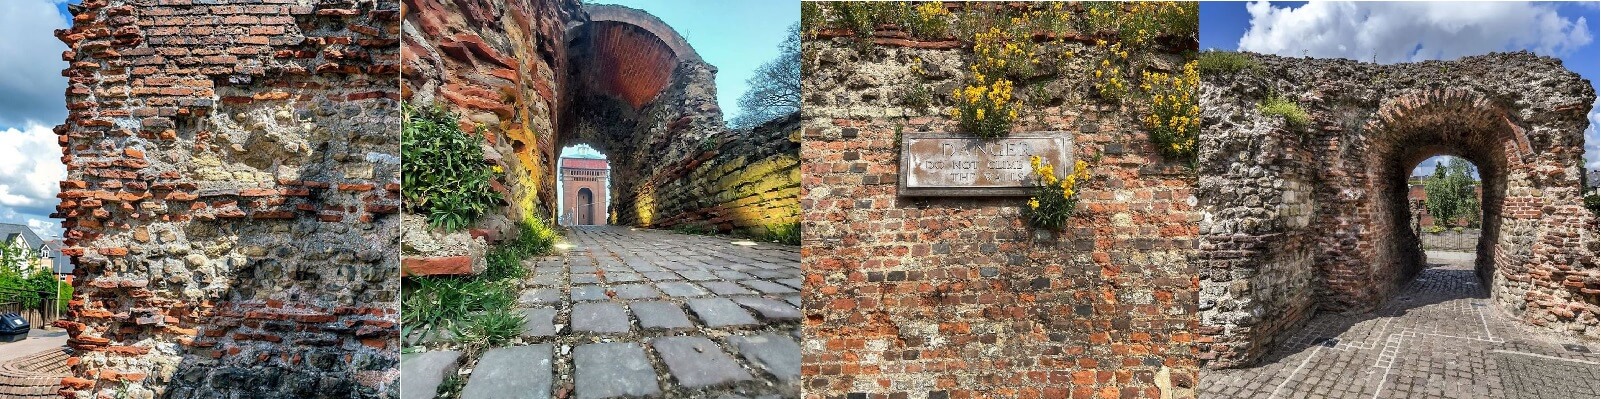 4 images of the Roman Wall & Balkerne Gateway